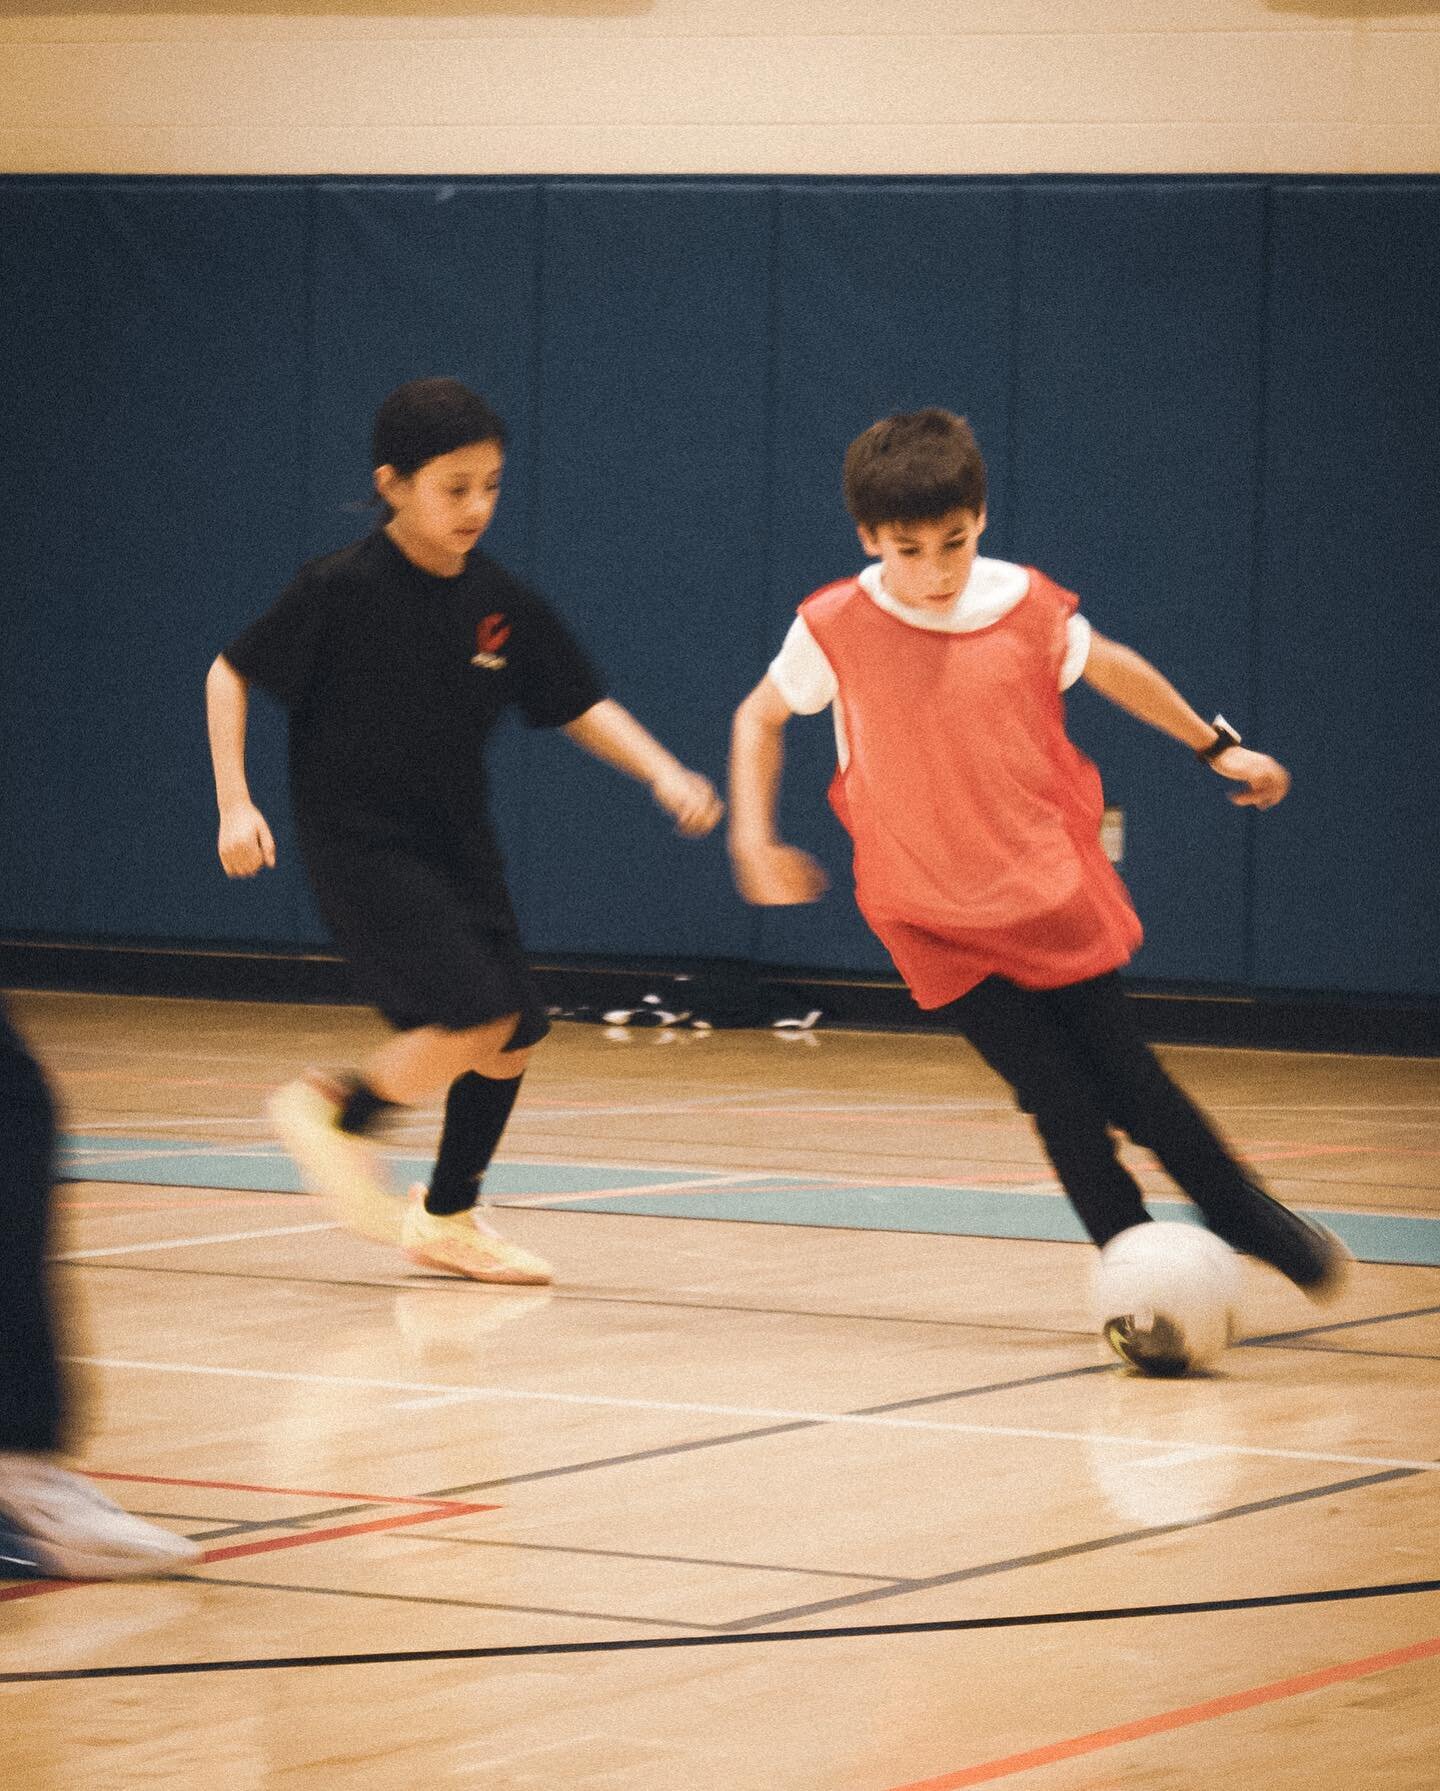 We are excited for another week of training in Chicago. ⚡️⚽️ Here are a few shots from last week. 

We are a youth #futsal training initiative with the emphasis on soccer player&rsquo;s skill improvement through the benefits of futsal. 

#PlayersDeve